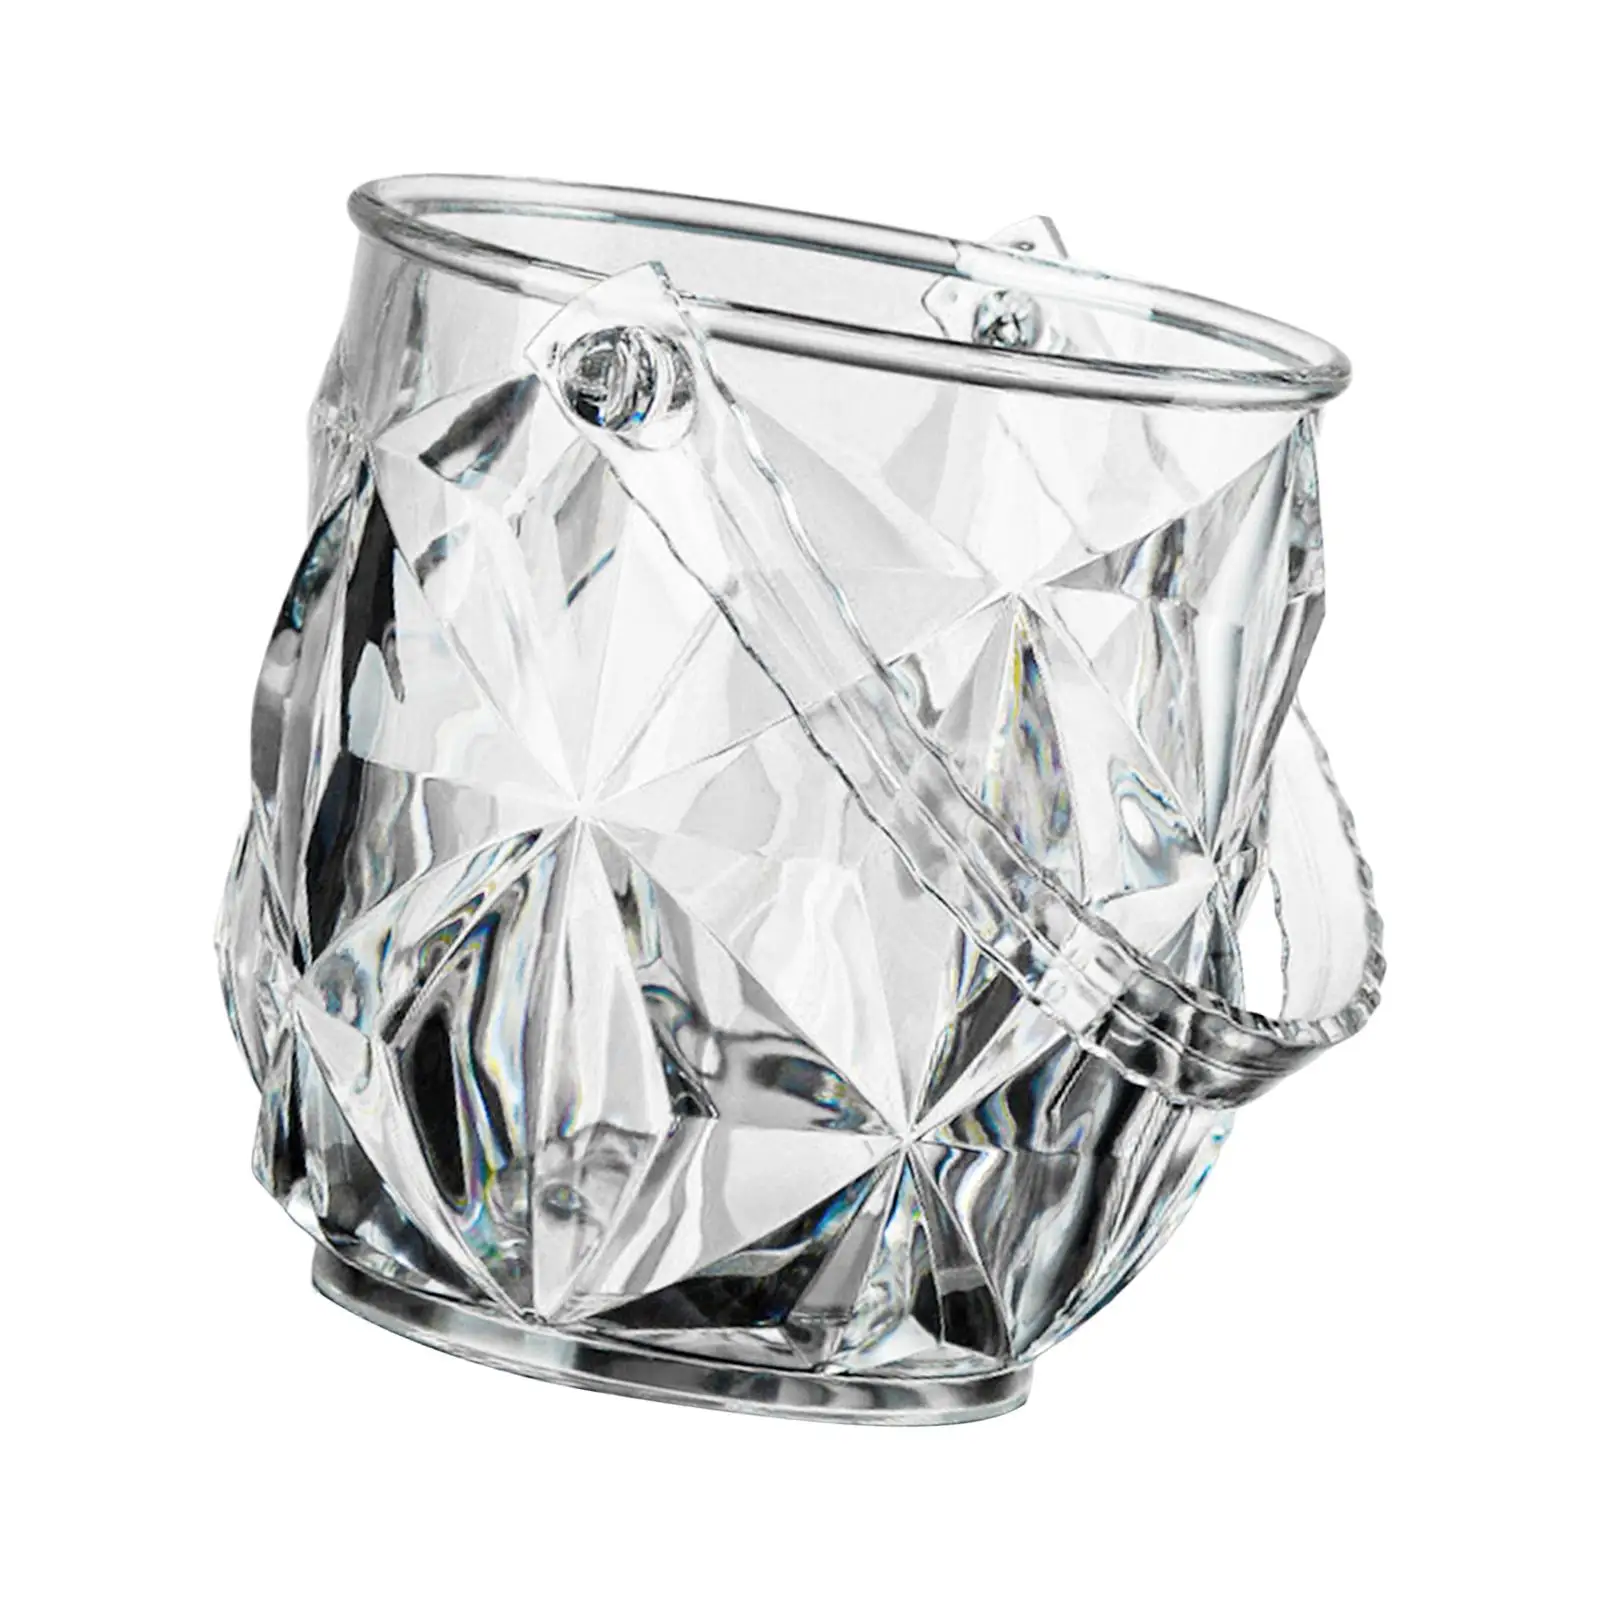 Ice Bucket Acrylic Reusable Champagne Bucket for Gatherings Party Bar